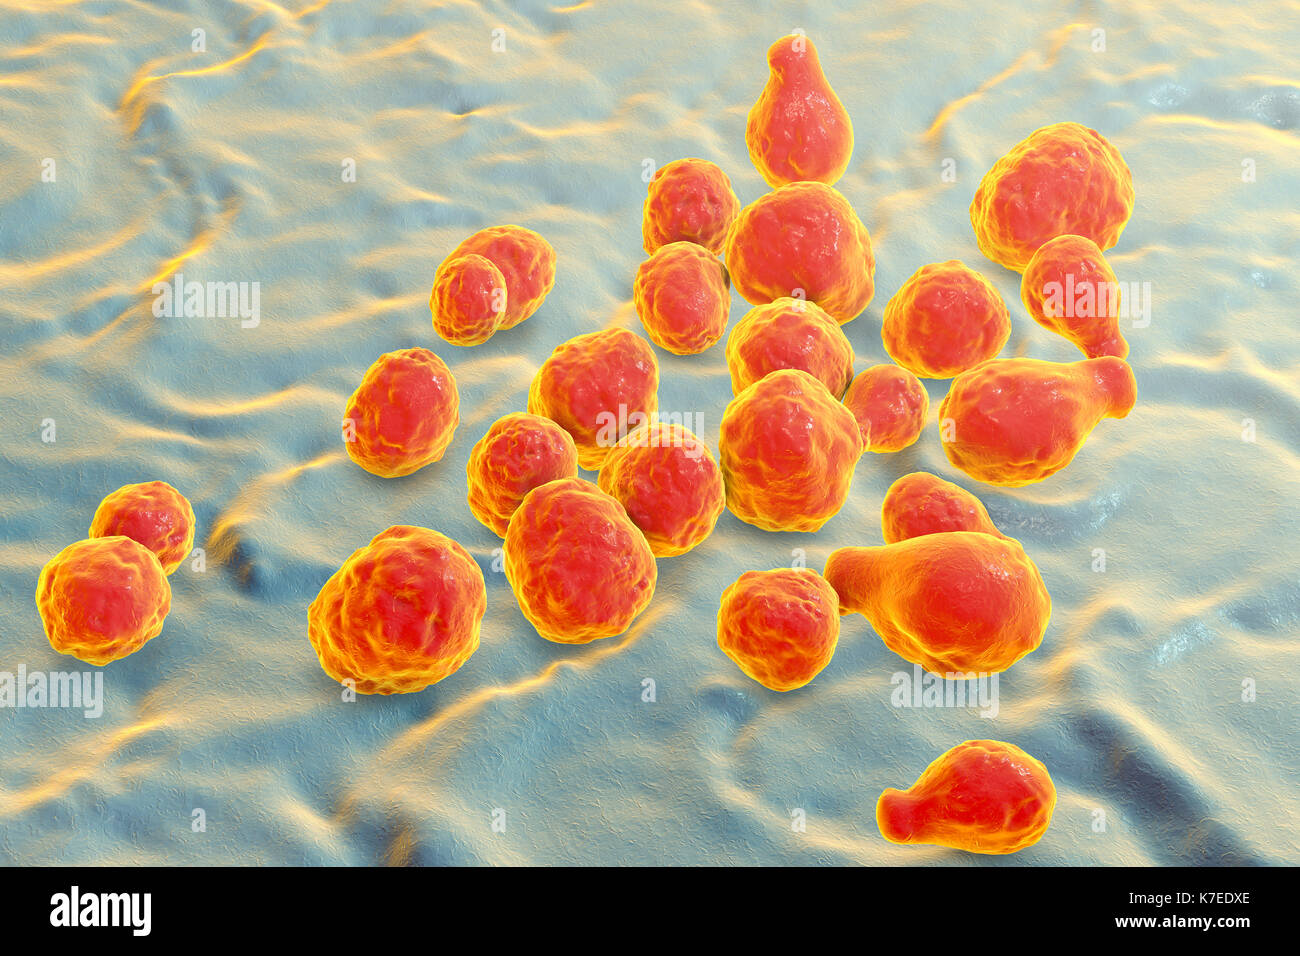 Cryptococcus neoformans fungus, computer illustration. C. neoformans is a yeast-like fungus that reproduces by budding. An acidic mucopolysaccharide capsule completely encloses the fungus. It can cause the disease cryptococcosis, especially in immune deficient patients, such as those with HIV/AIDS (acquired immunodeficiency syndrome). It can infect the brain, causing meningitis or brain abscesses, lungs or skin. The most common clinical form is meningoencephalitis. It is caused by inhaling the fungus from soil that has been contaminated by pigeon droppings. Stock Photo